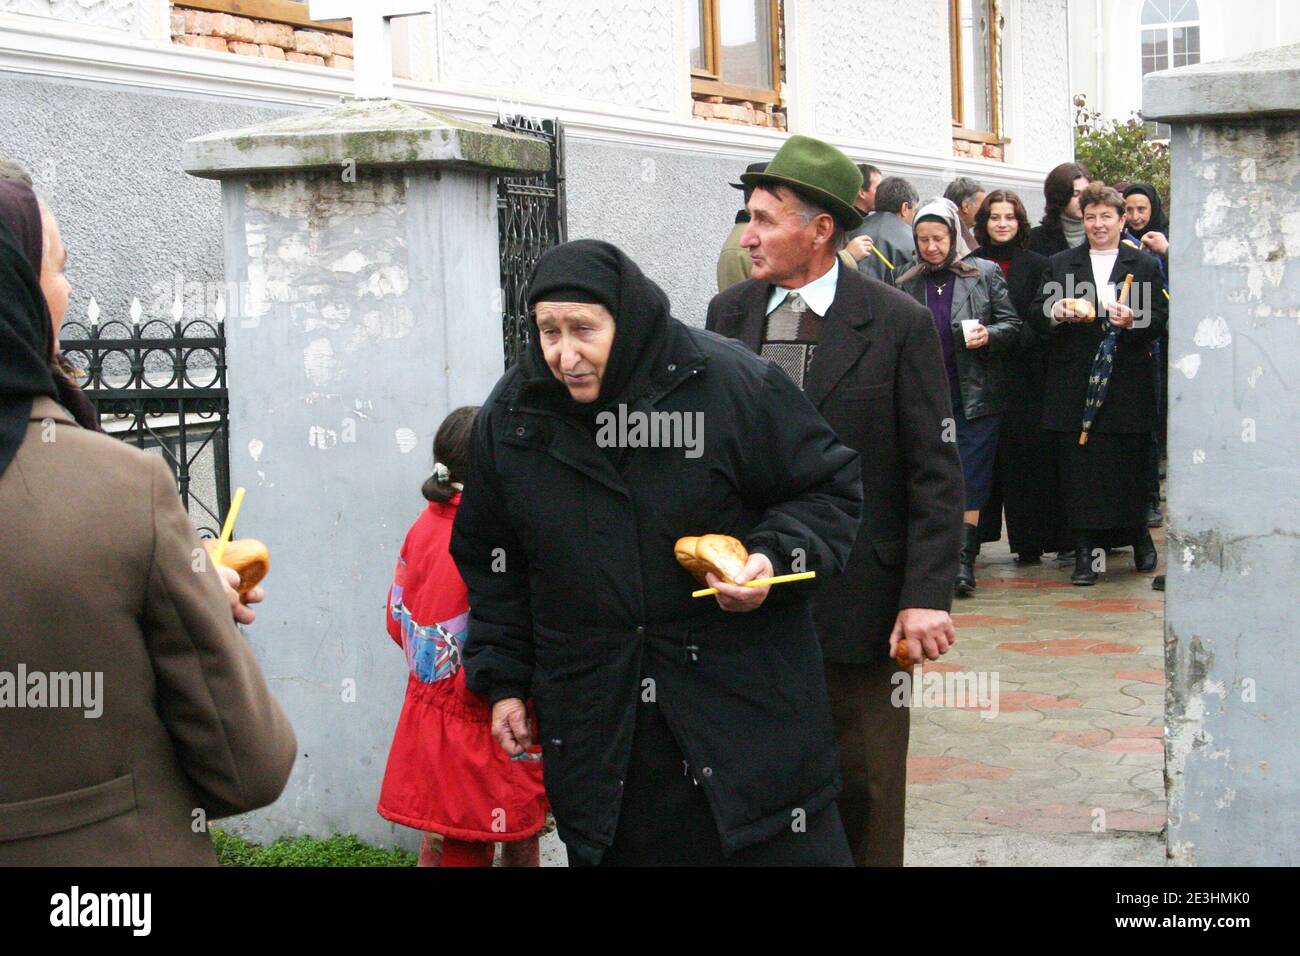 Brasov County, Romania. Villagers coming out of the church with alms in their hands. Stock Photo